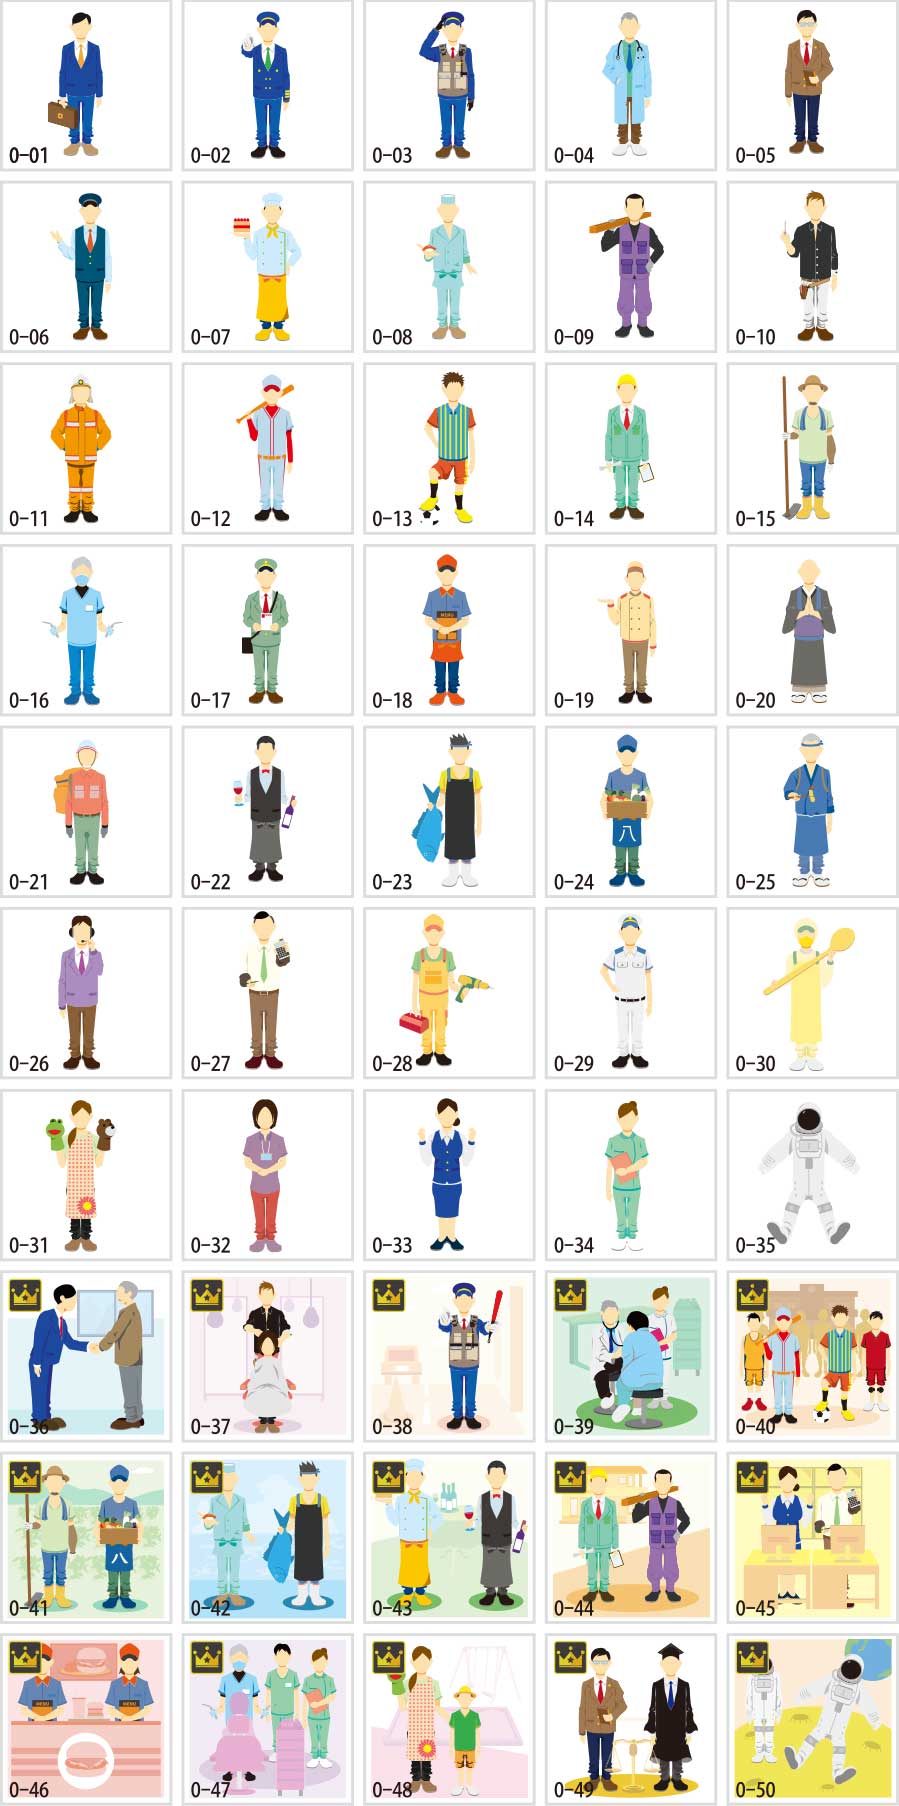 Illustrations of various occupations